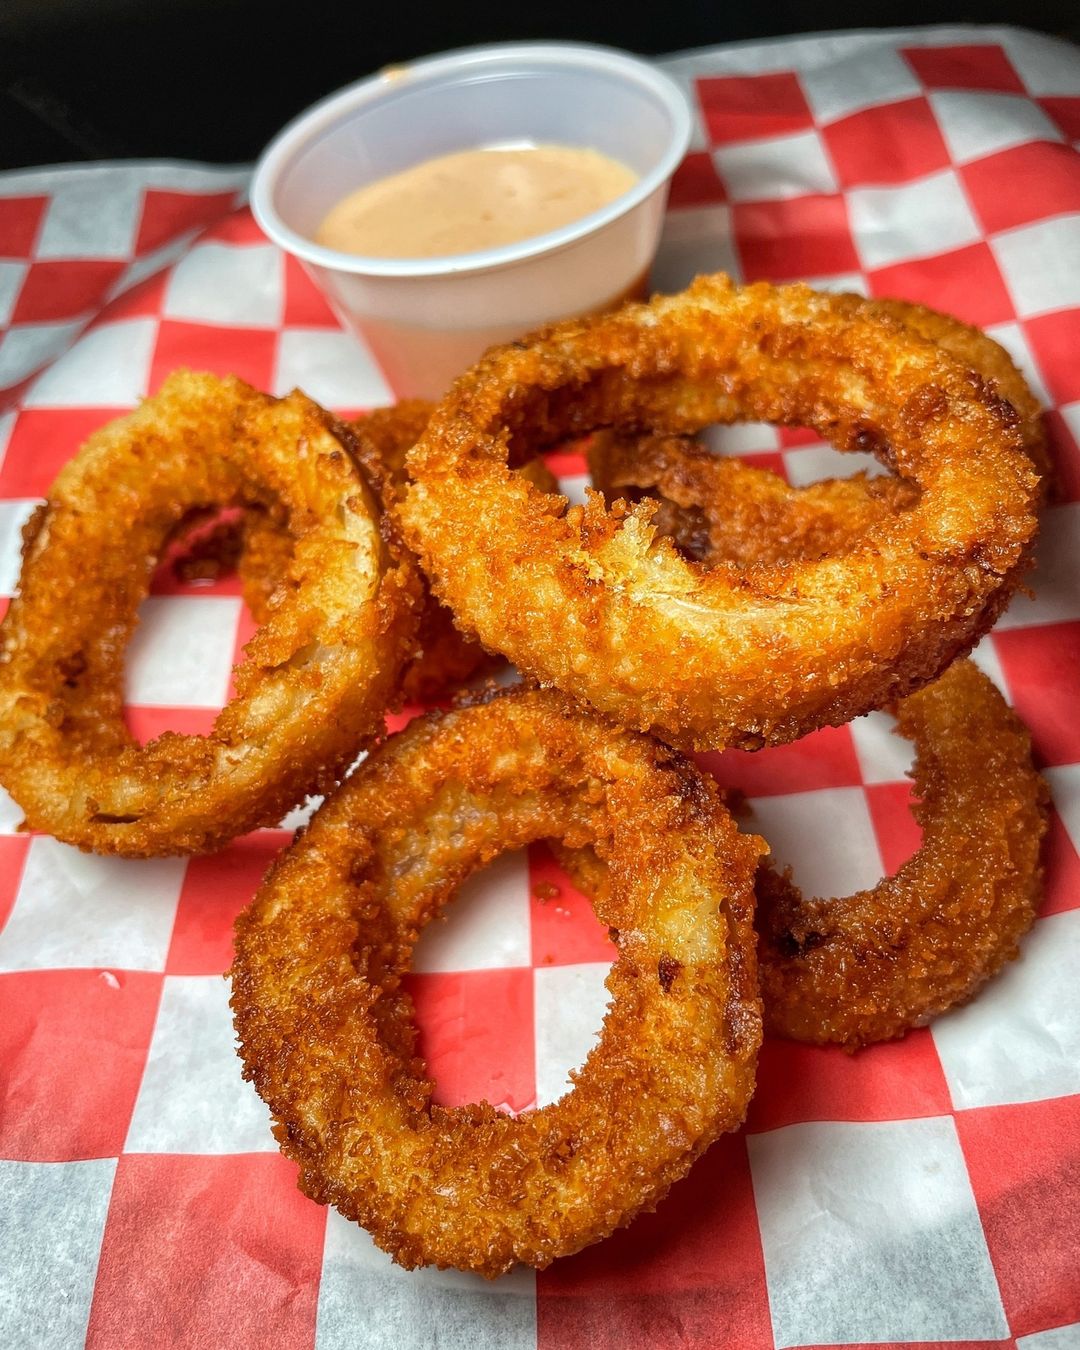 Onion Rings from No Good Burger food truck